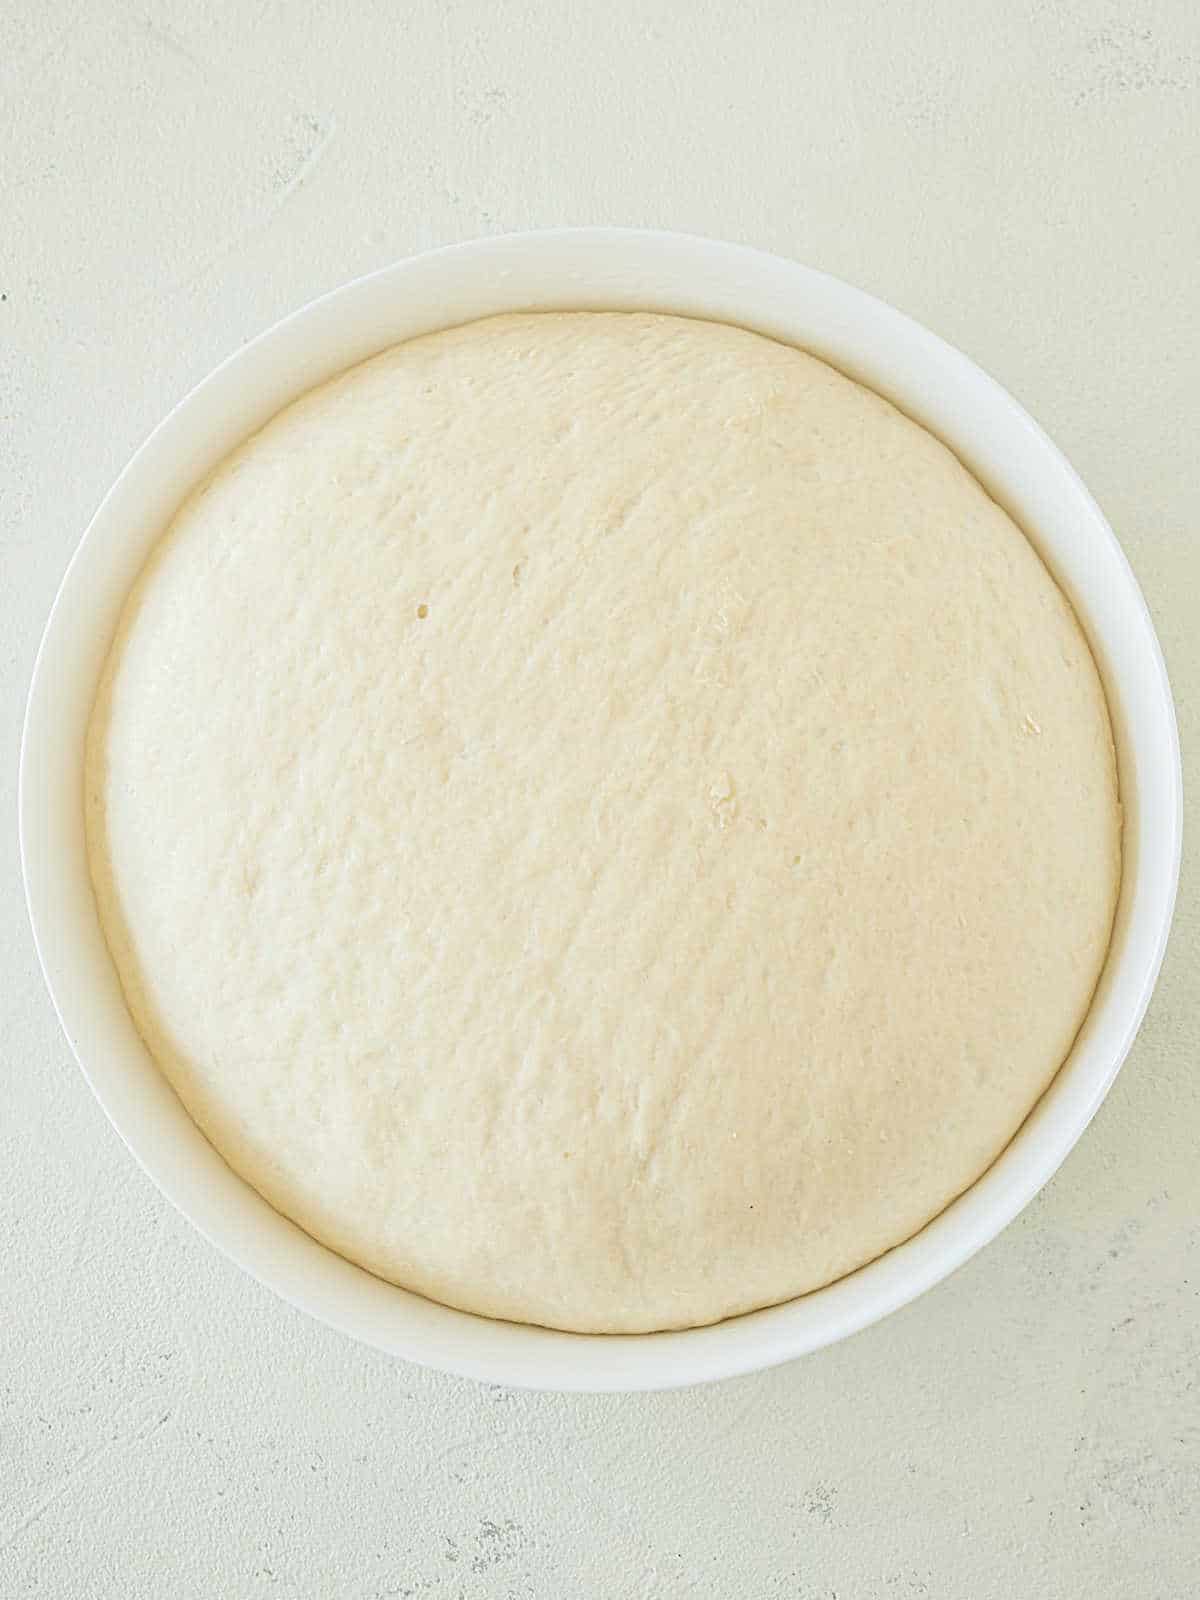 Proofed pretzel dough in a white bowl on a whitish surface.